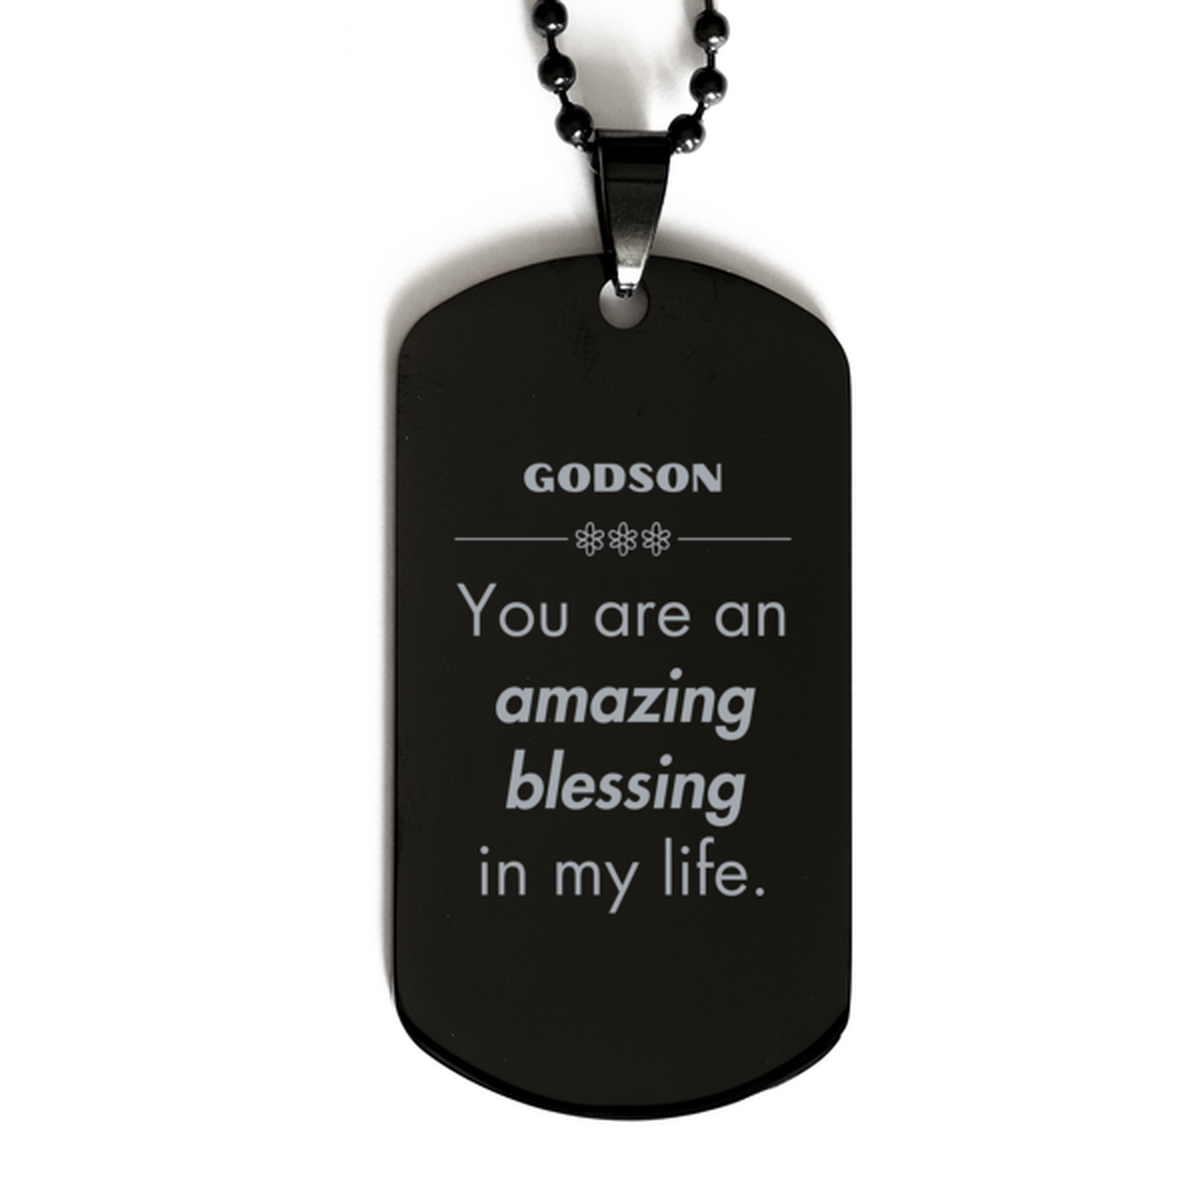 Godson Black Dog Tag, You are an amazing blessing in my life, Thank You Gifts For Godson, Inspirational Birthday Christmas Unique Gifts For Godson